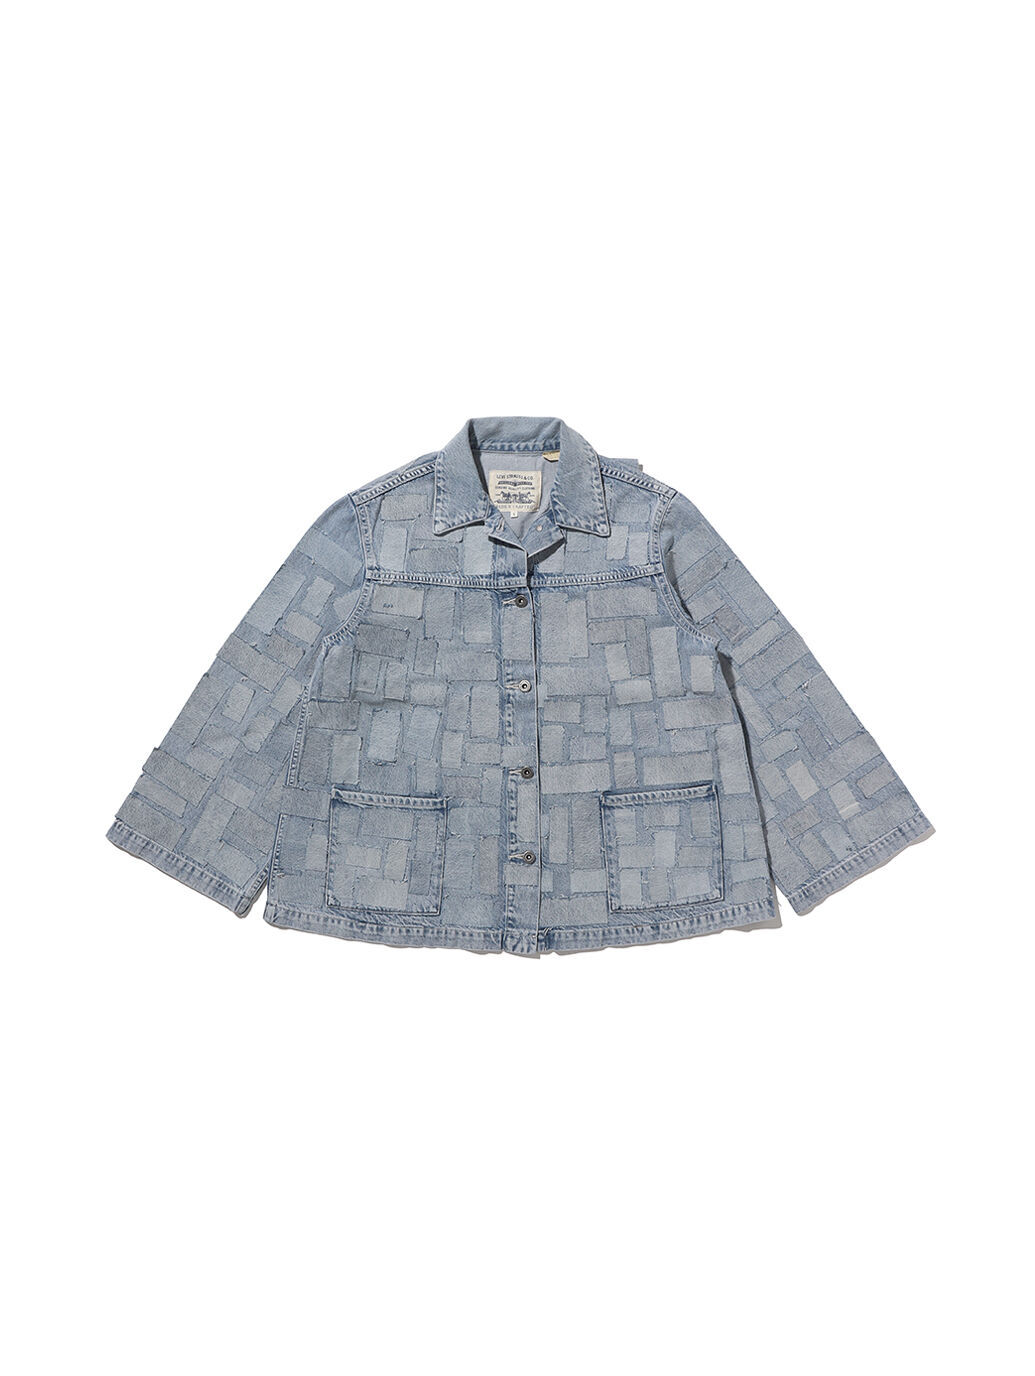 LEVI'S® MADE&CRAFTED®BELL トラッカージャケット MISSHAPES